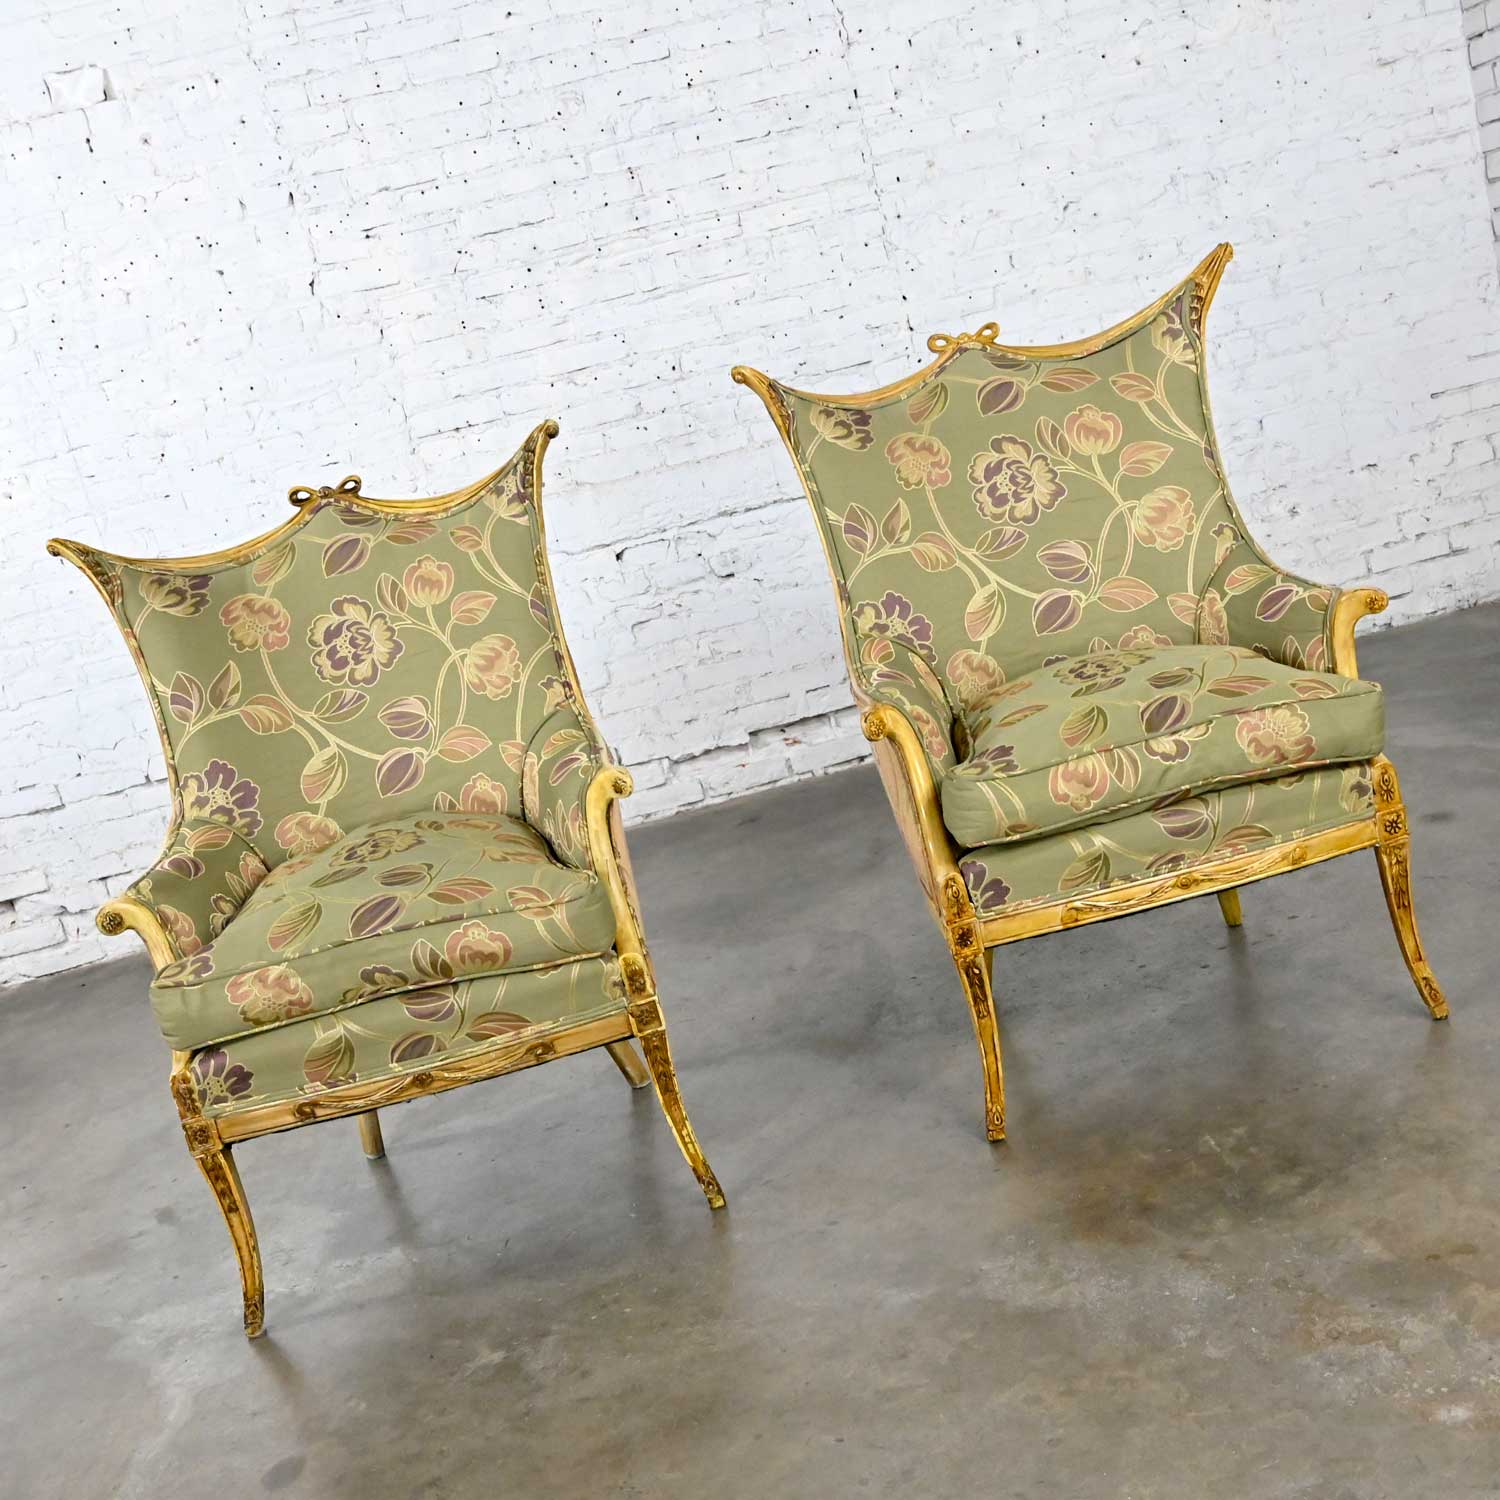 Vintage French Style Pair of Distressed Painted Armchairs Neoclassical Hollywood Regency Flair